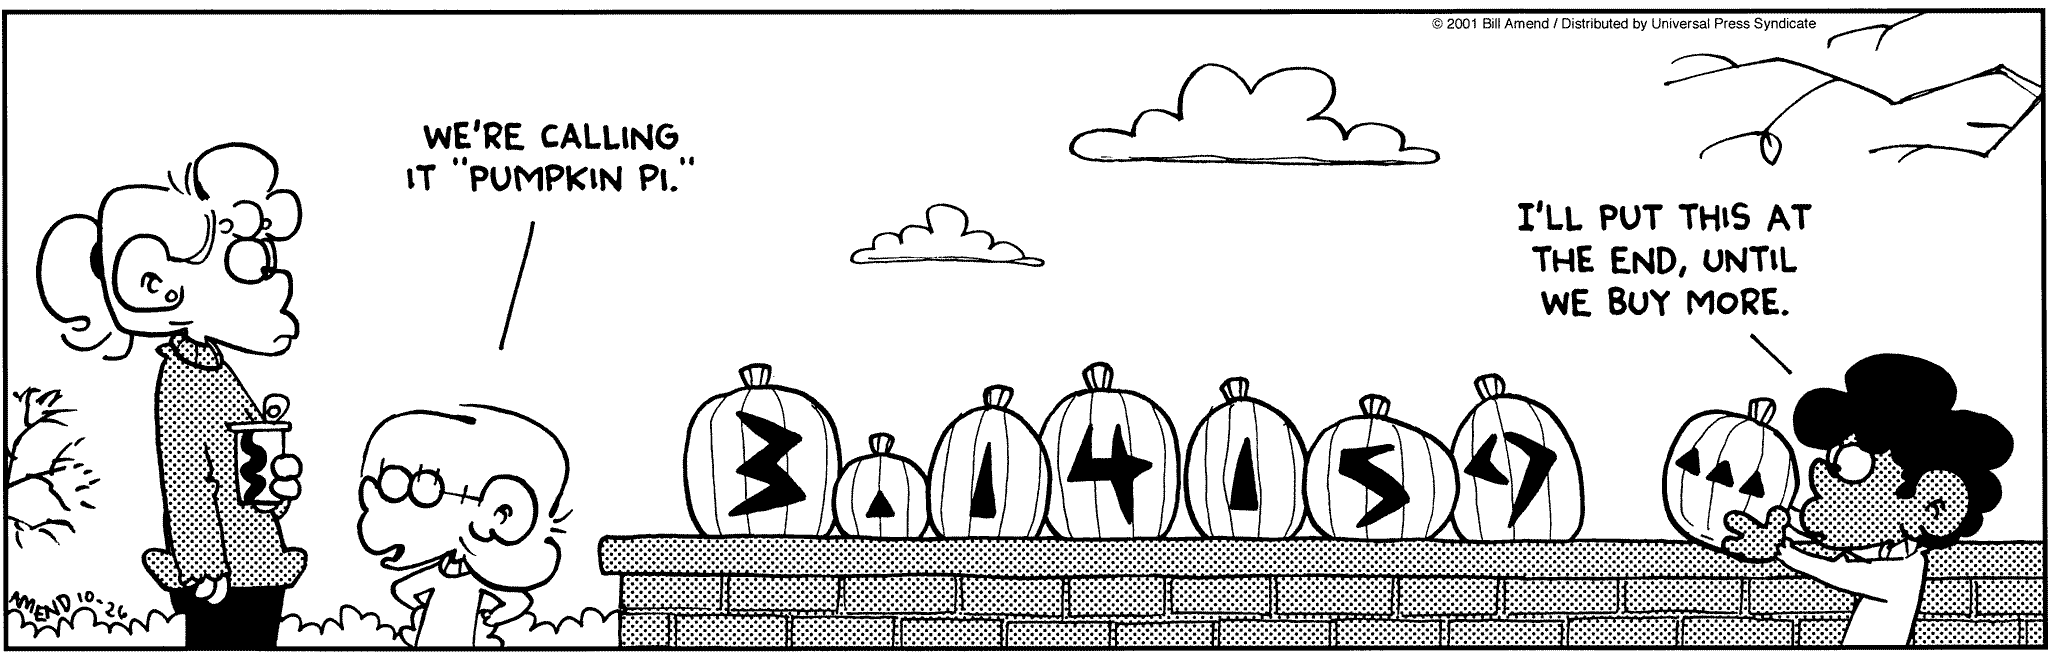 Halloween Comics - FoxTrot comic strip by Bill Amend - Published October 26, 2001 - Jason Fox: We're calling it "pumpkin pi." Marcus Jones: I'll put this at the end until we buy more.